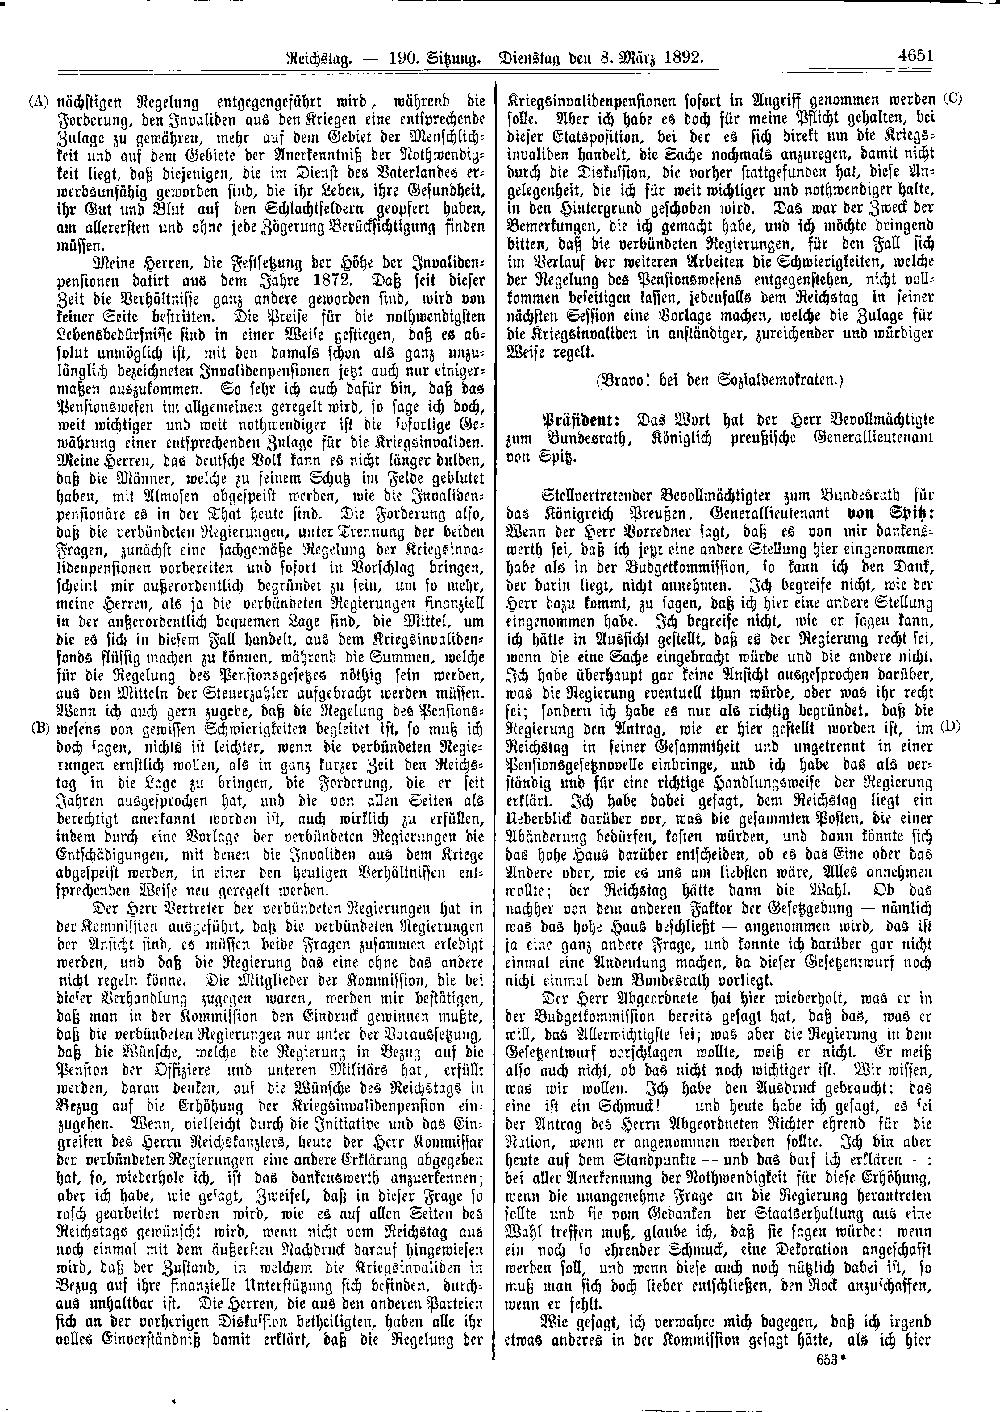 Scan of page 4651